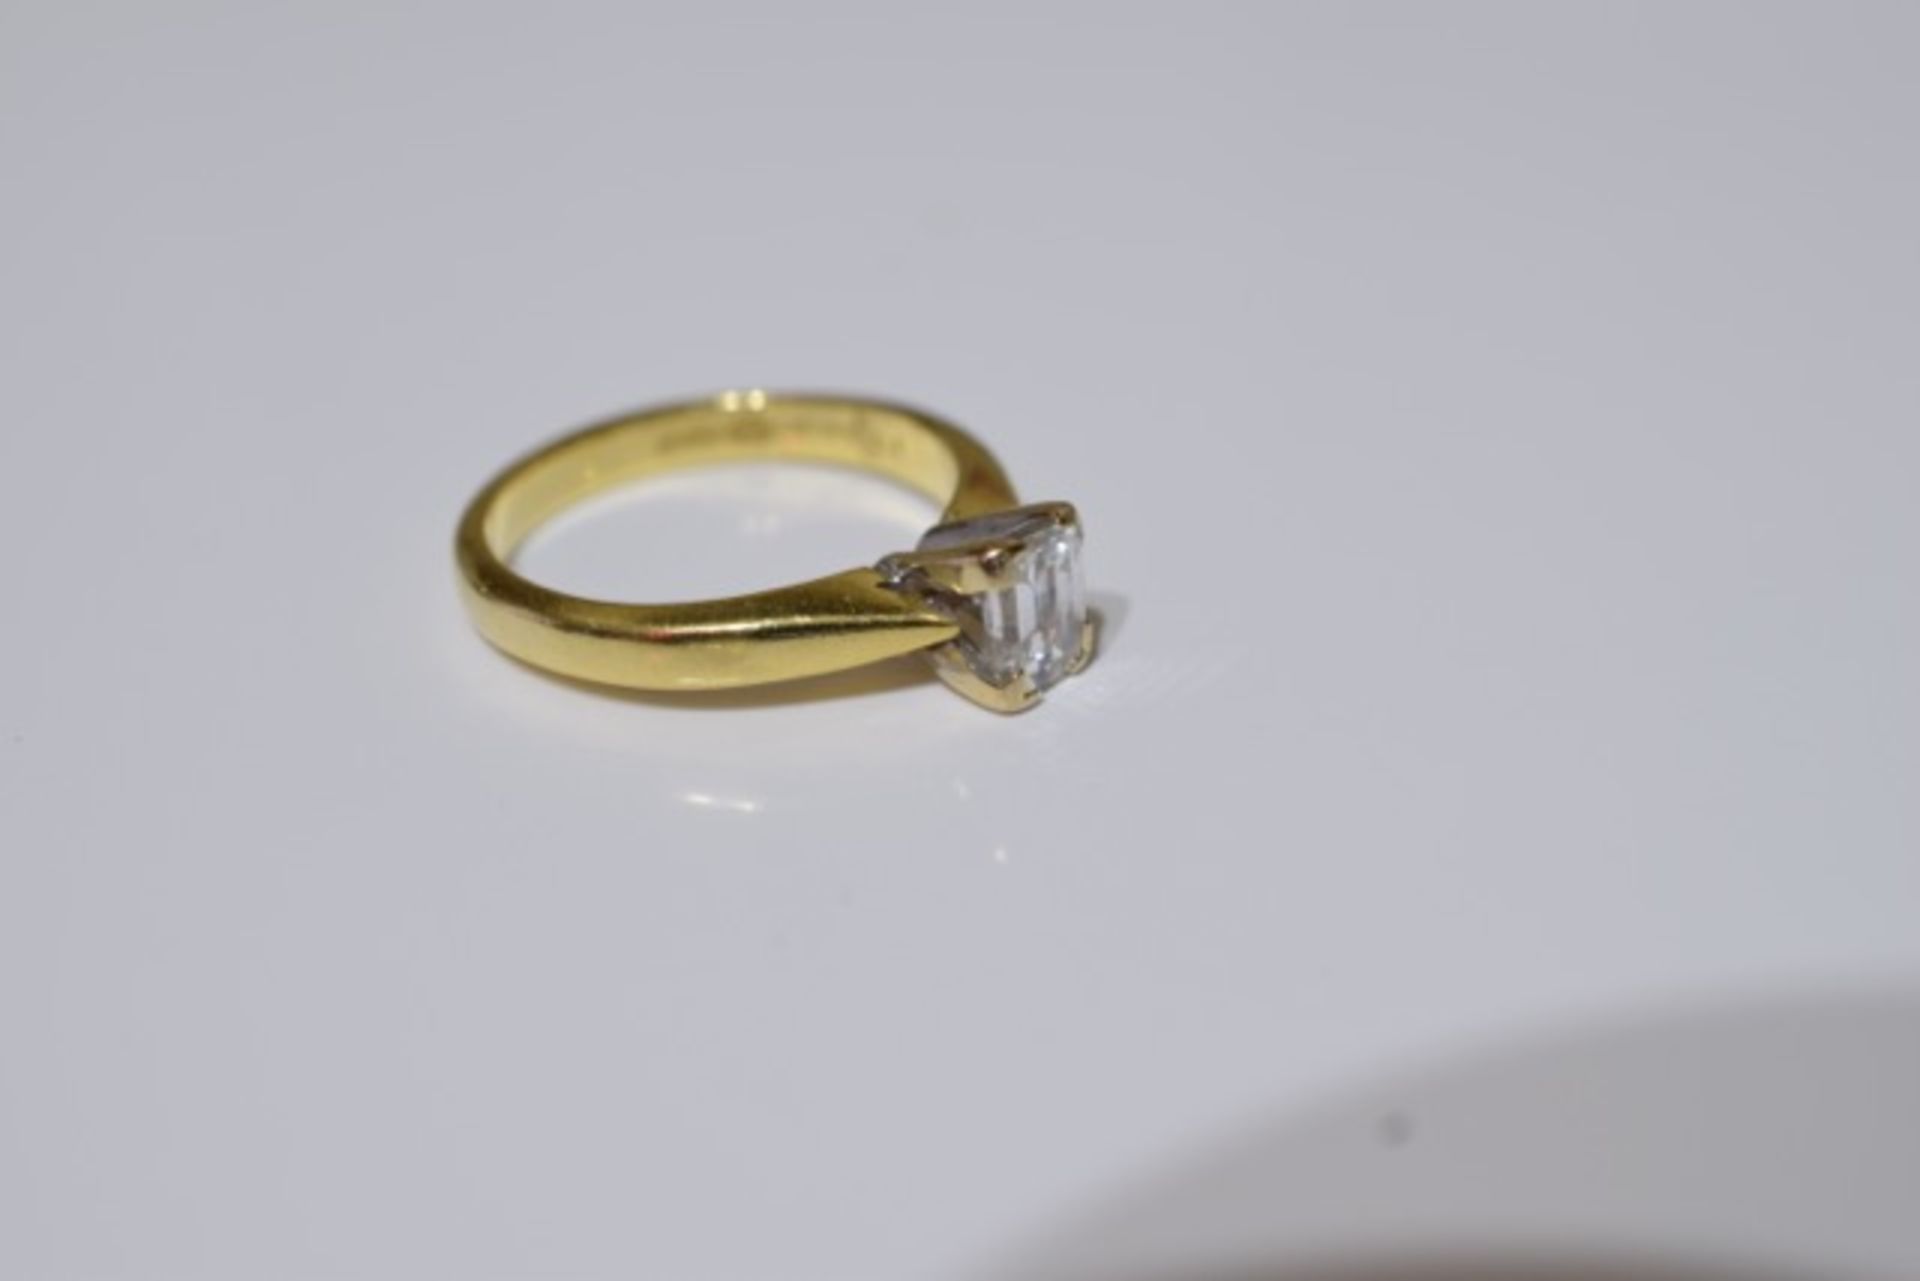 18ct Gold Emerald cut diamond ring, Size J, Clear without inclusions visible to the eye. - Image 3 of 5